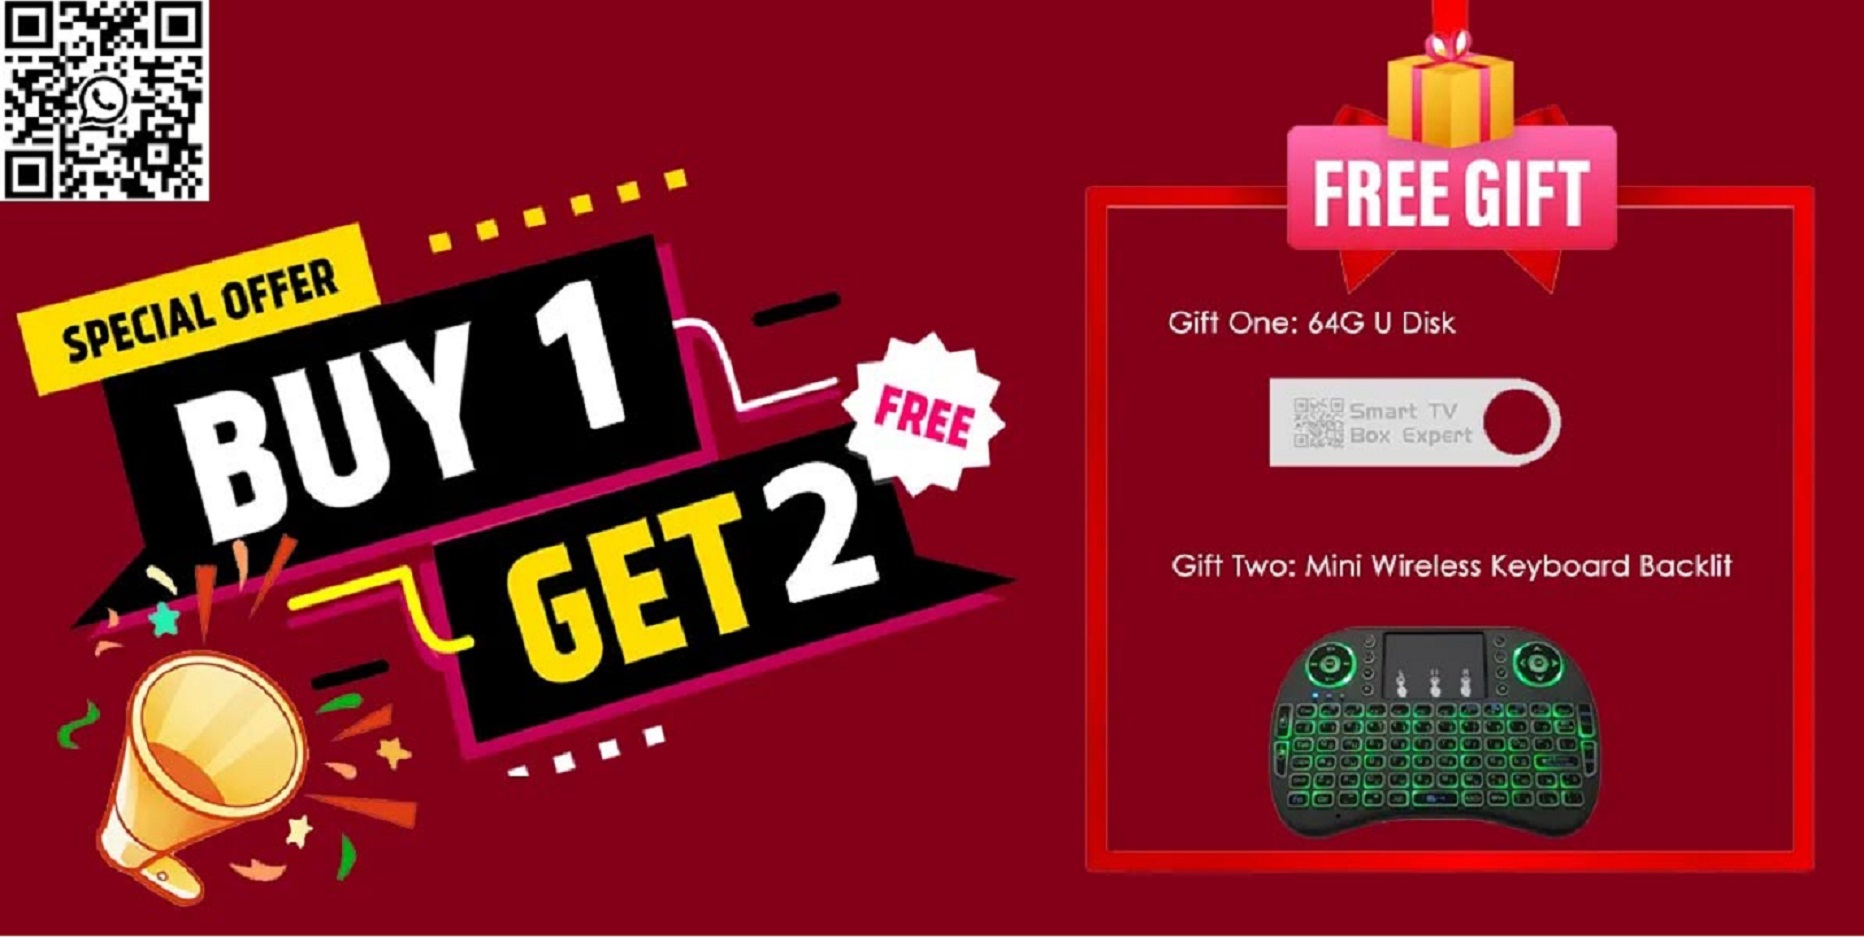 How can I Get 2 Free Gifts for the Order I Make?